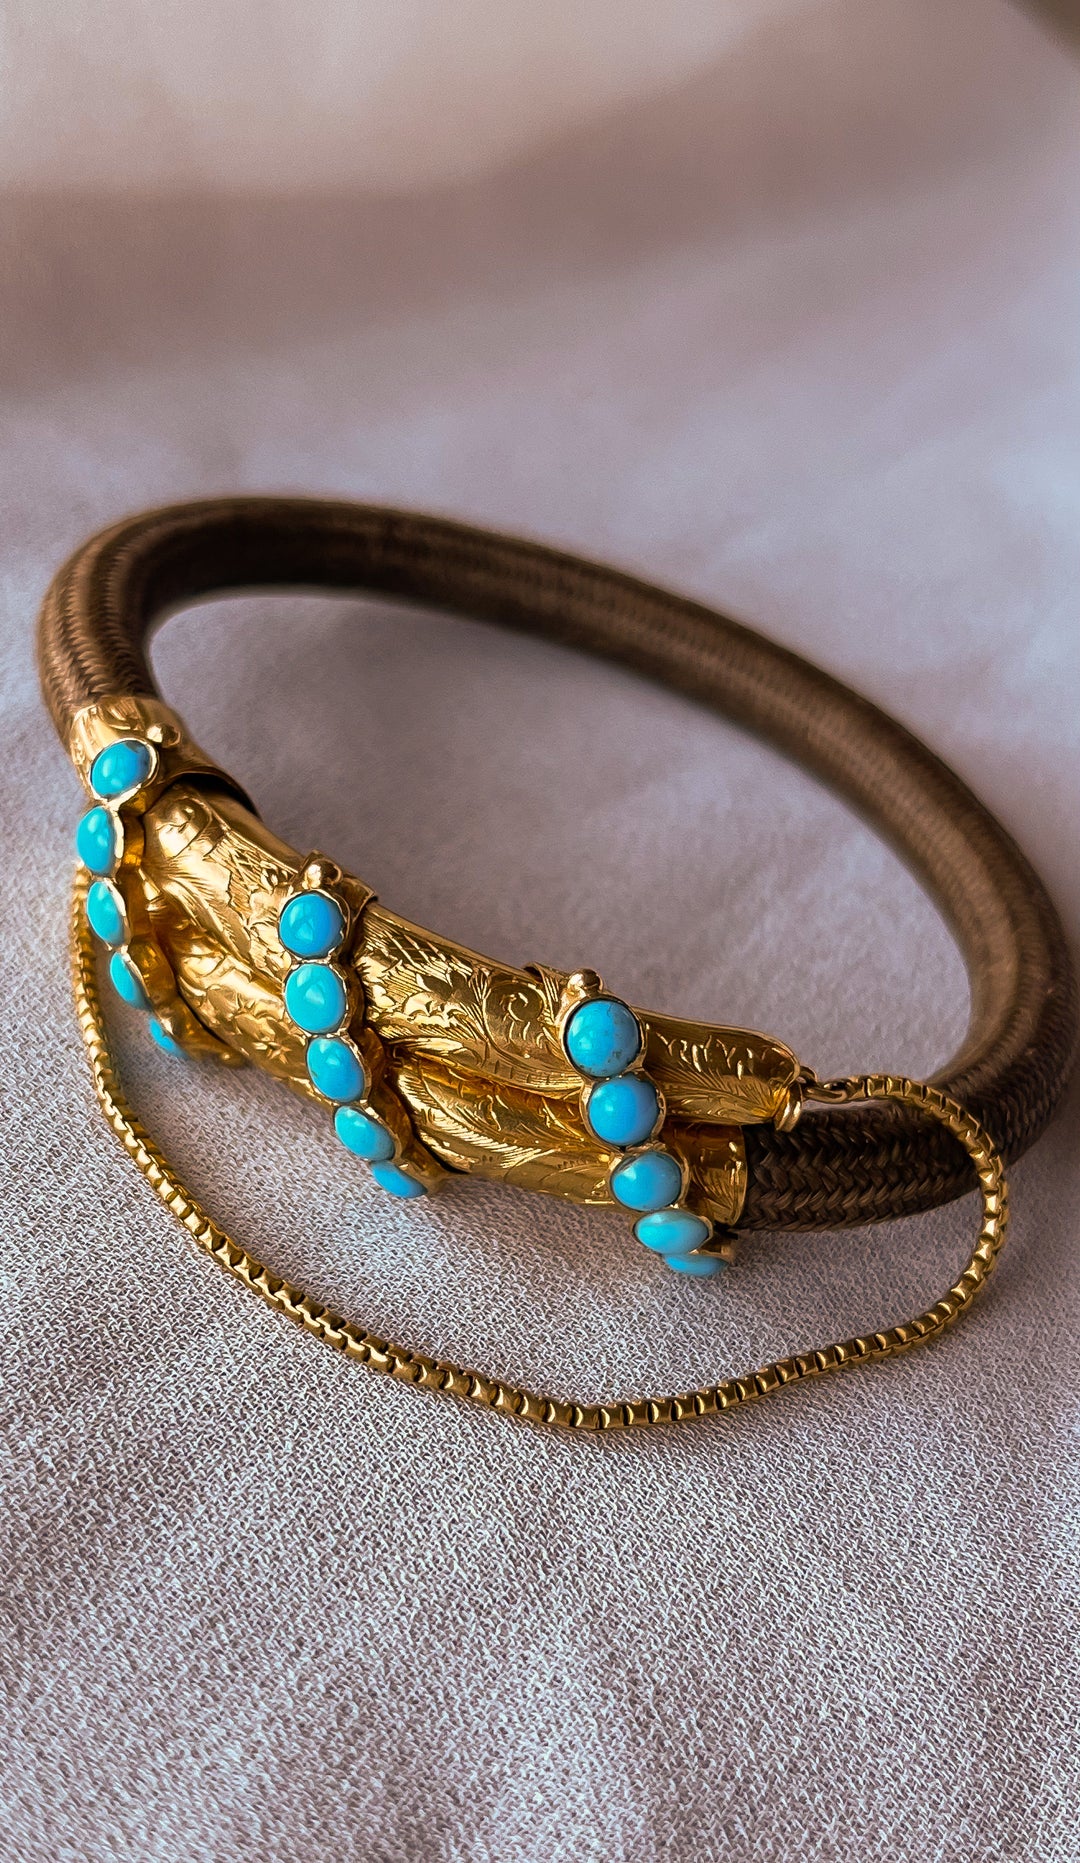 Rare 18ct Hair Bracelet with Turquoise Cabochons